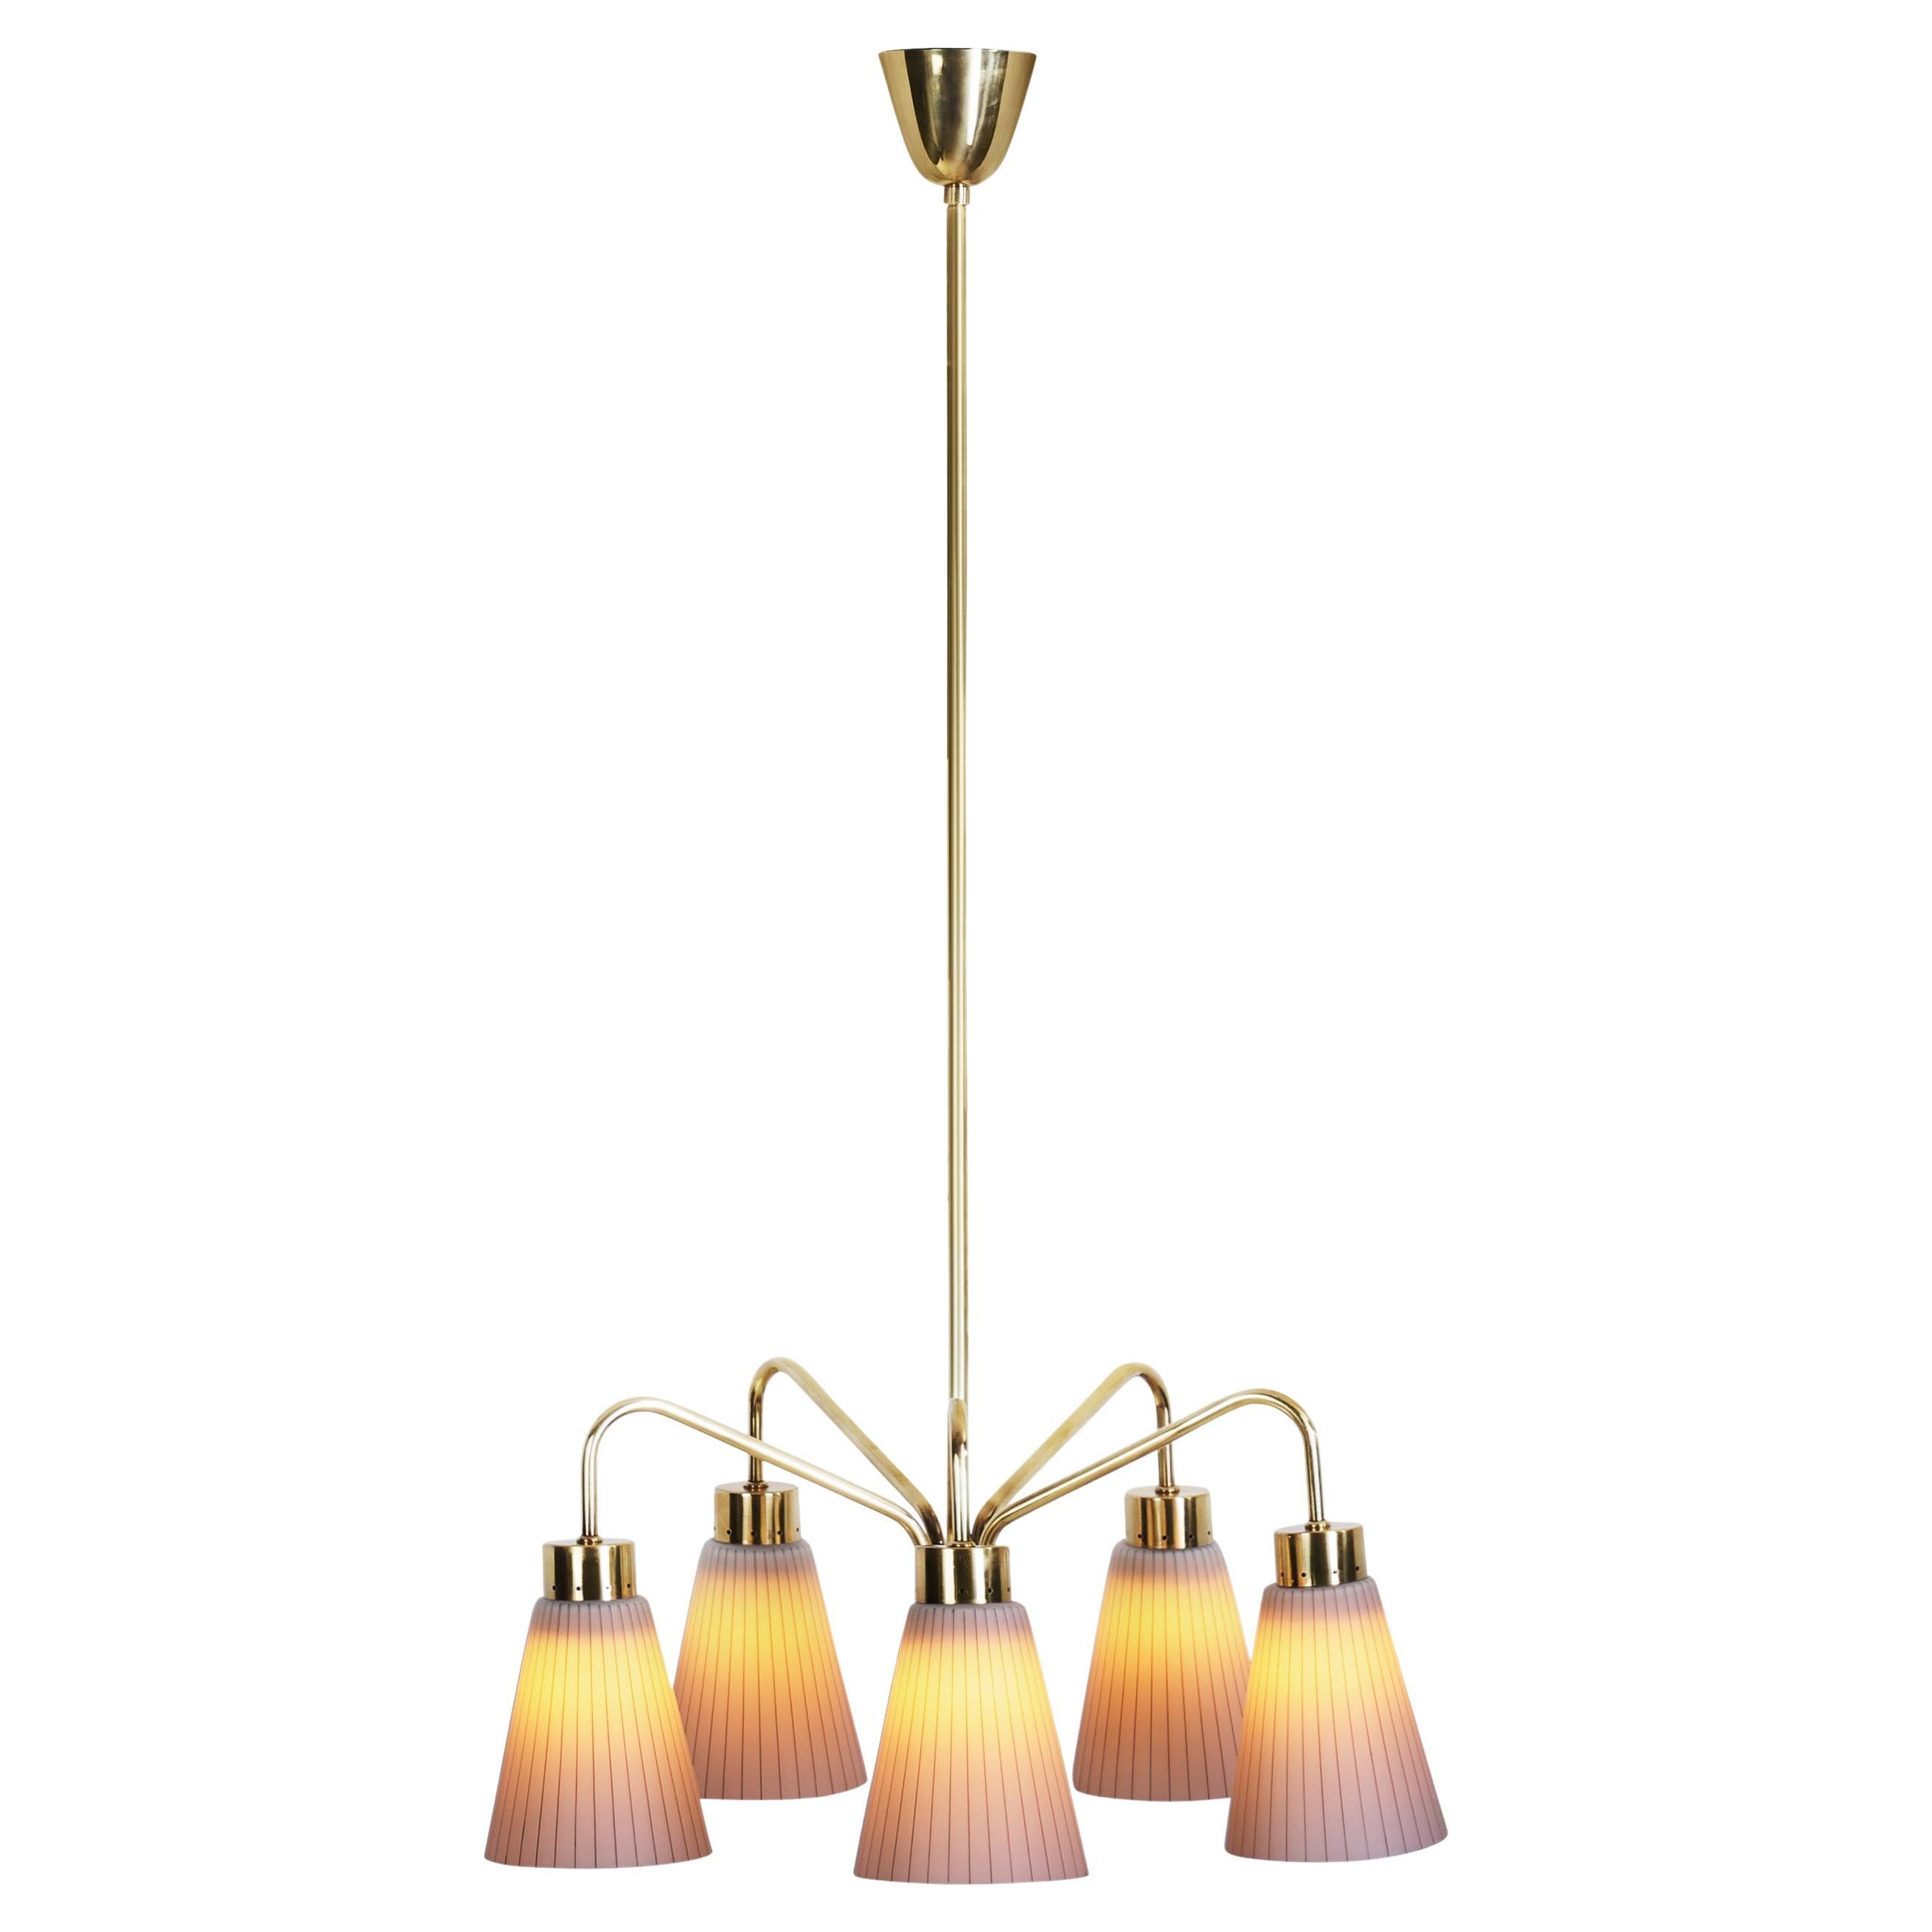 Mid-Century Modern Brass Ceiling Lamp with Striped Glass Shades, Europe ca 1950s For Sale